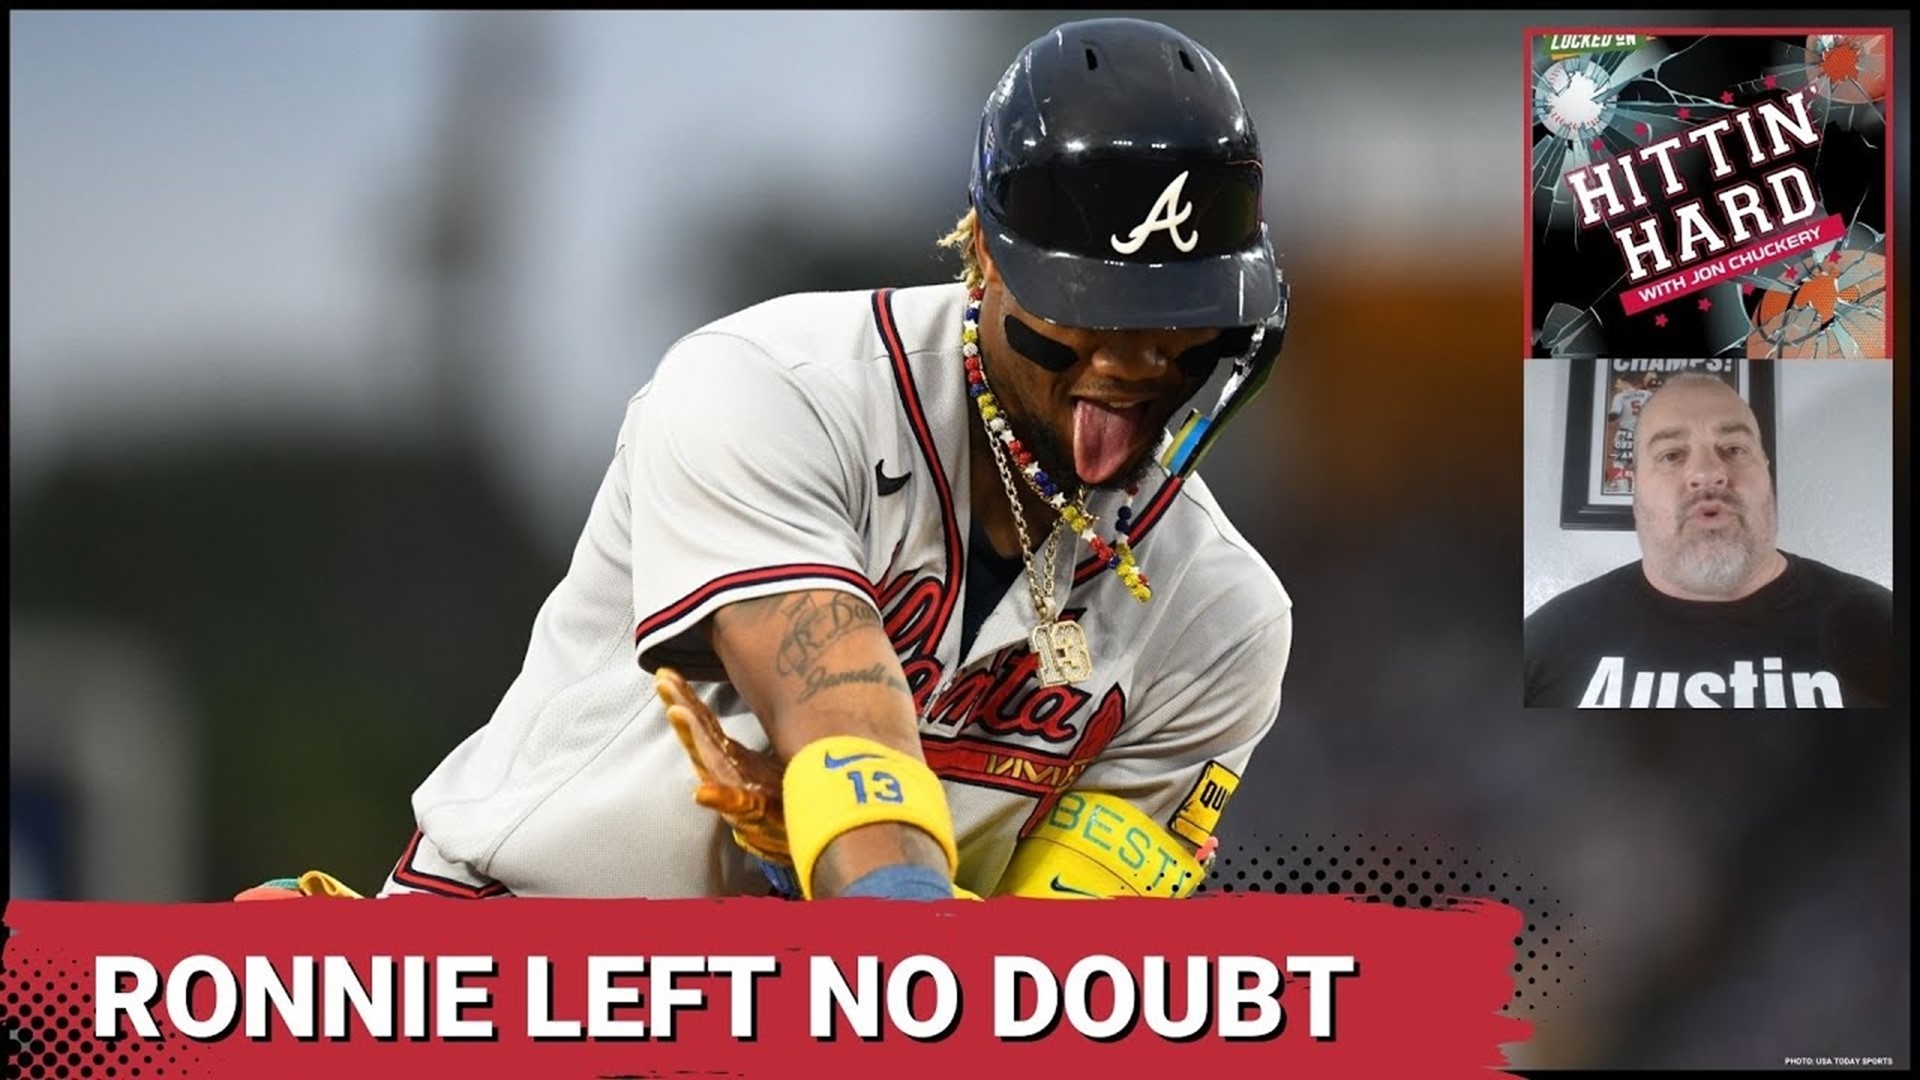 The Atlanta Braves took the series against the Los Angeles Dodgers. Ronald Acun Jr. went 6-17 with three home runs against the vaunted Dodgers.